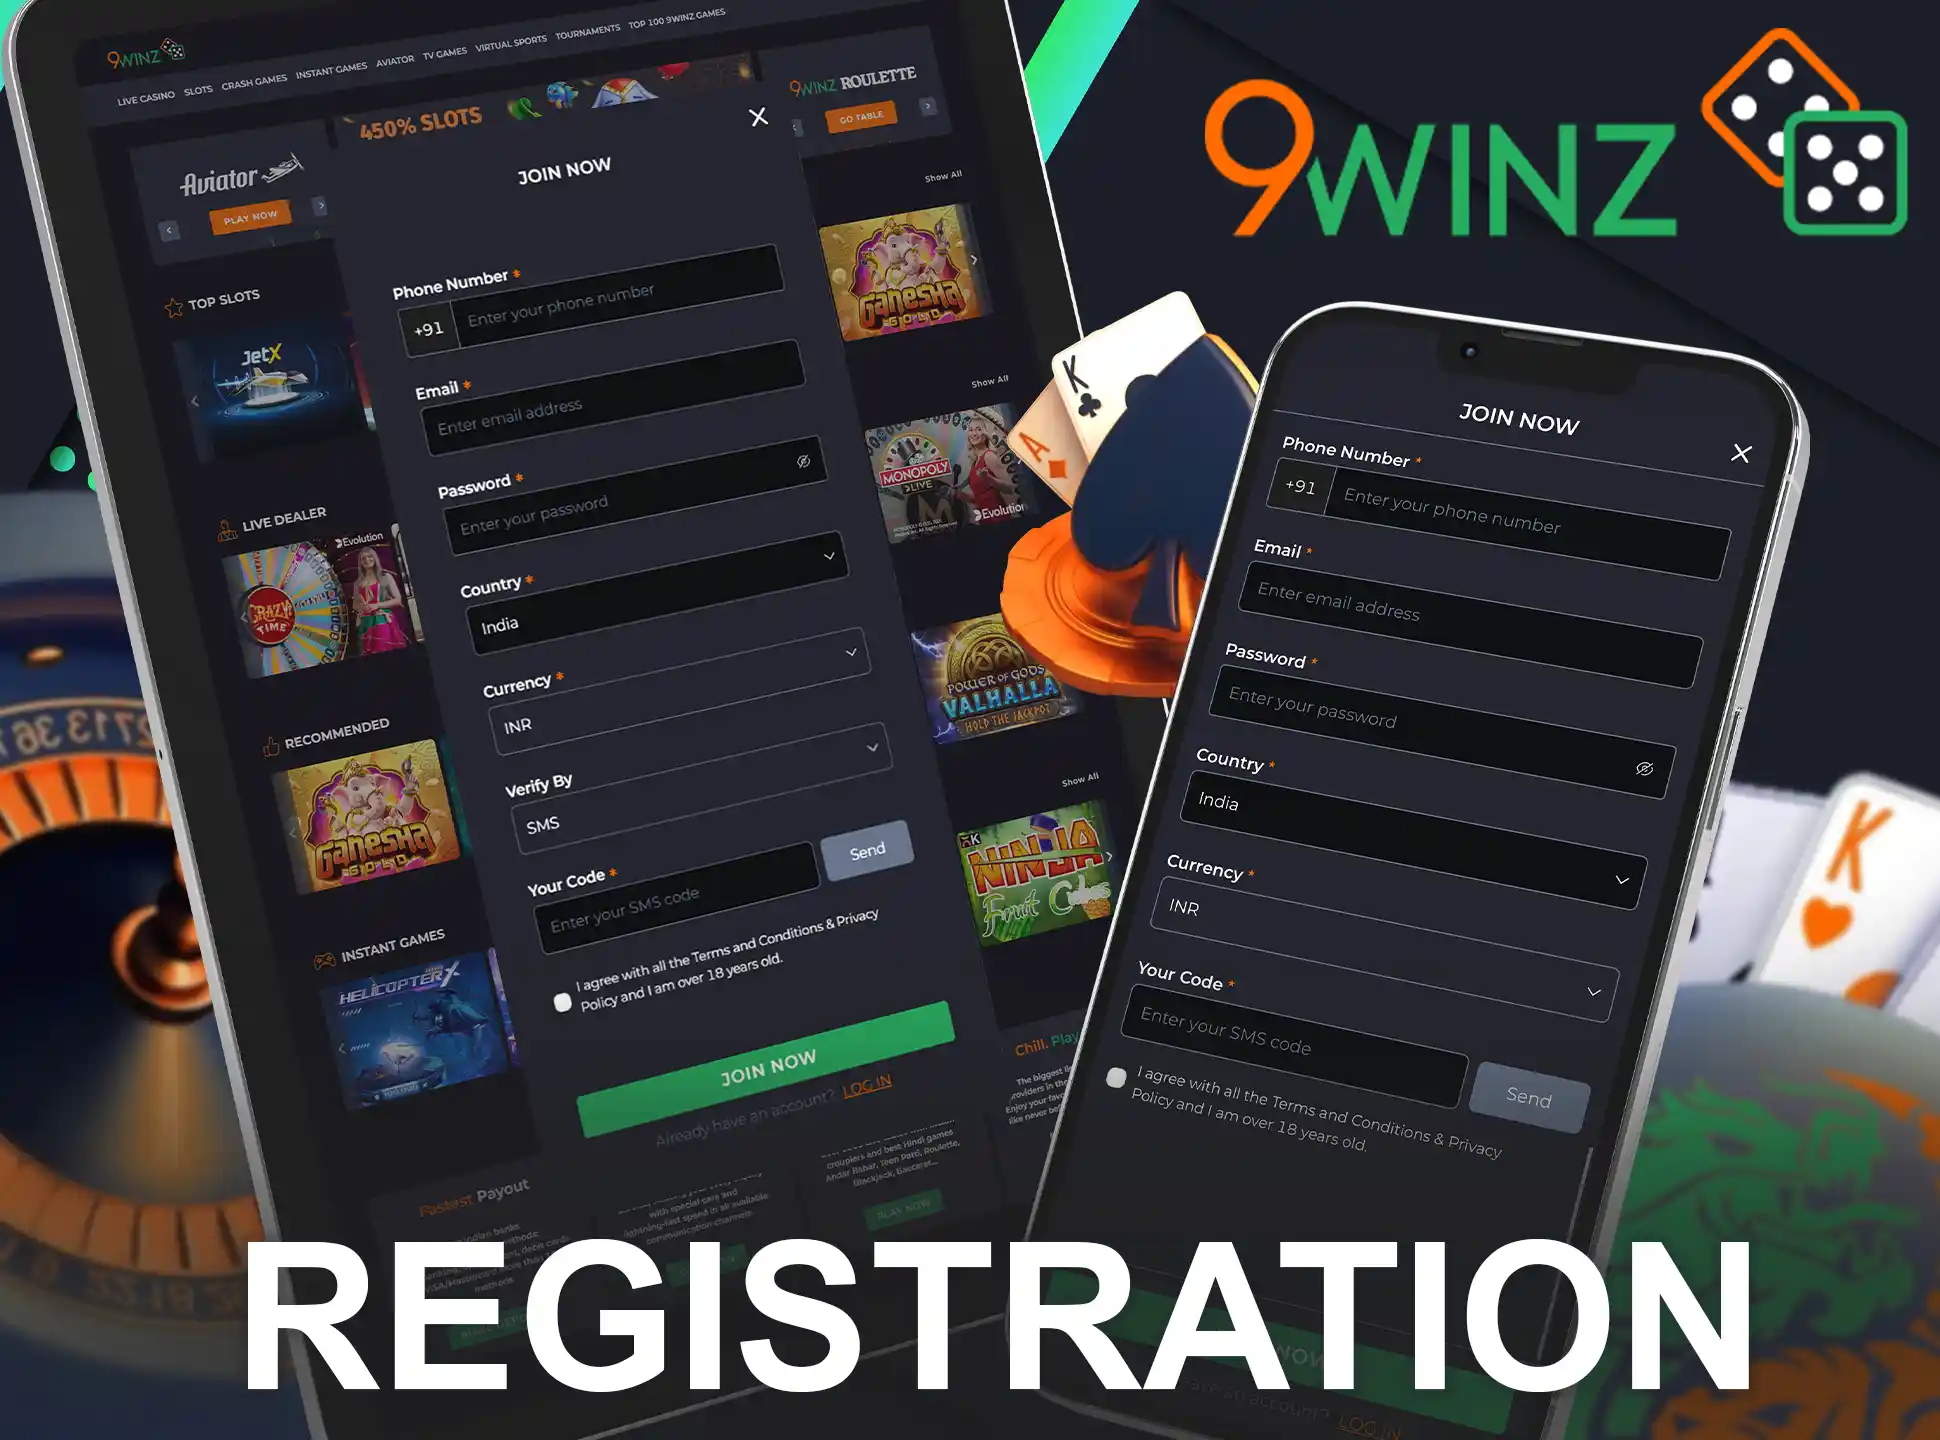 To start playing at 9winz casino open the official site and fill out the registration form.